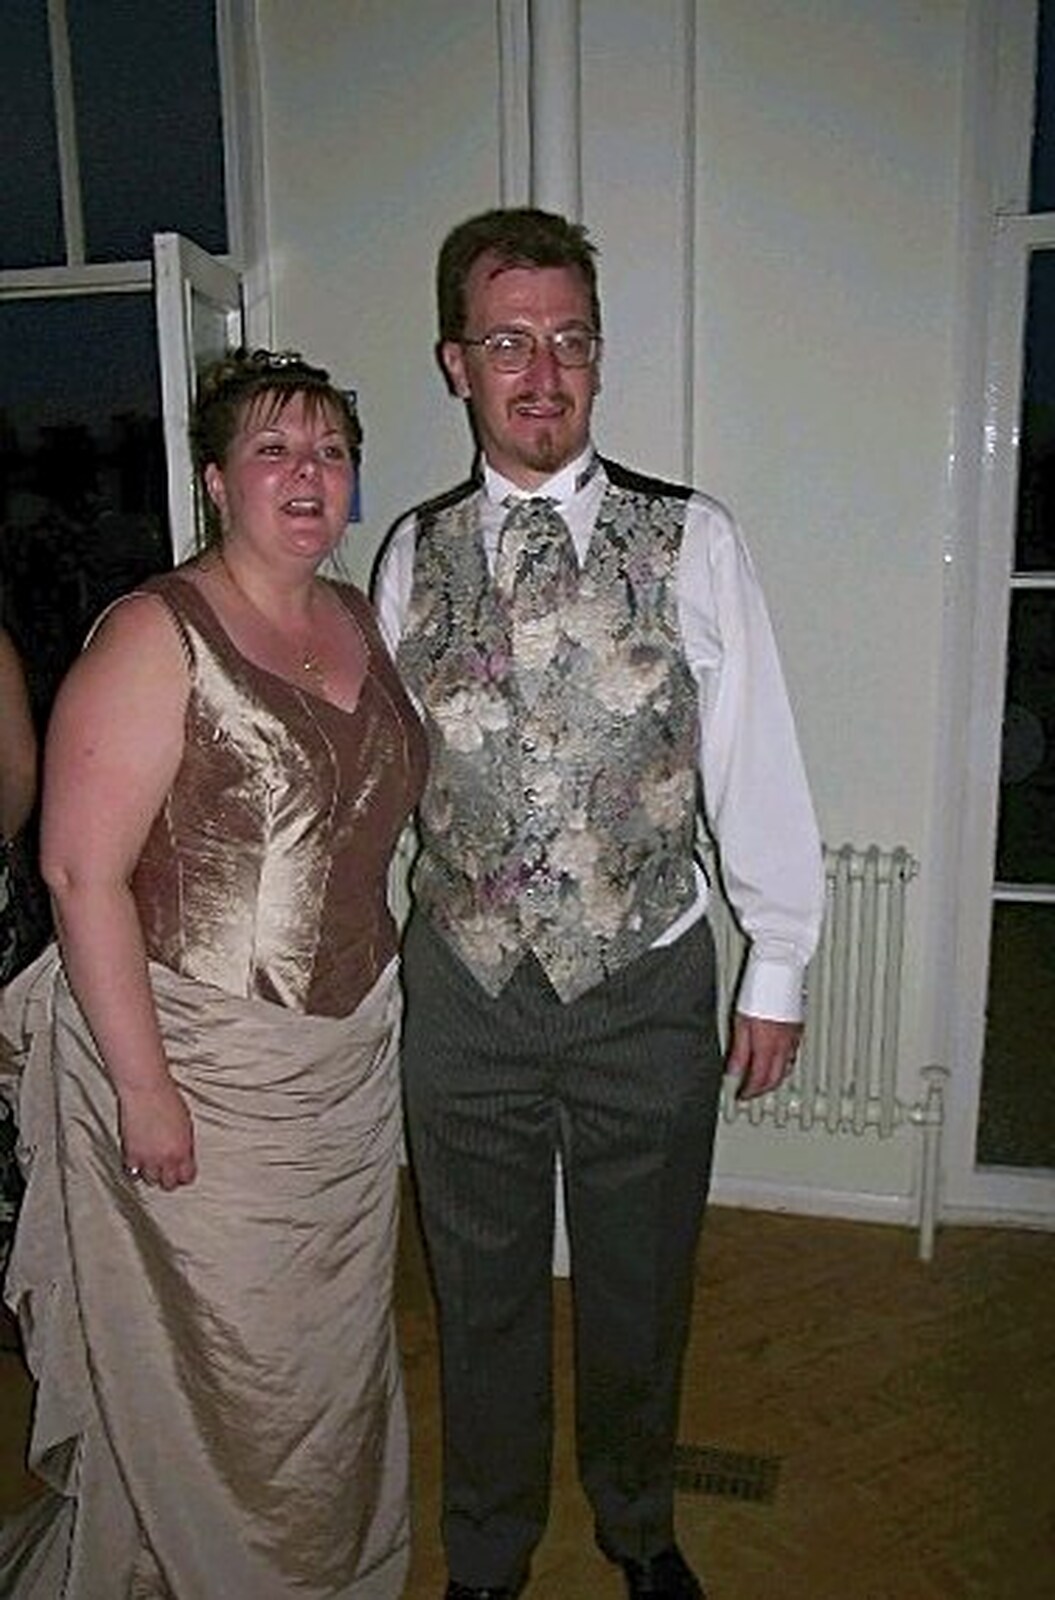 Lisa and Phil from Phil and Lisa's Wedding, Woolverston Hall, Ipswich, Suffolk - 1st July 2001